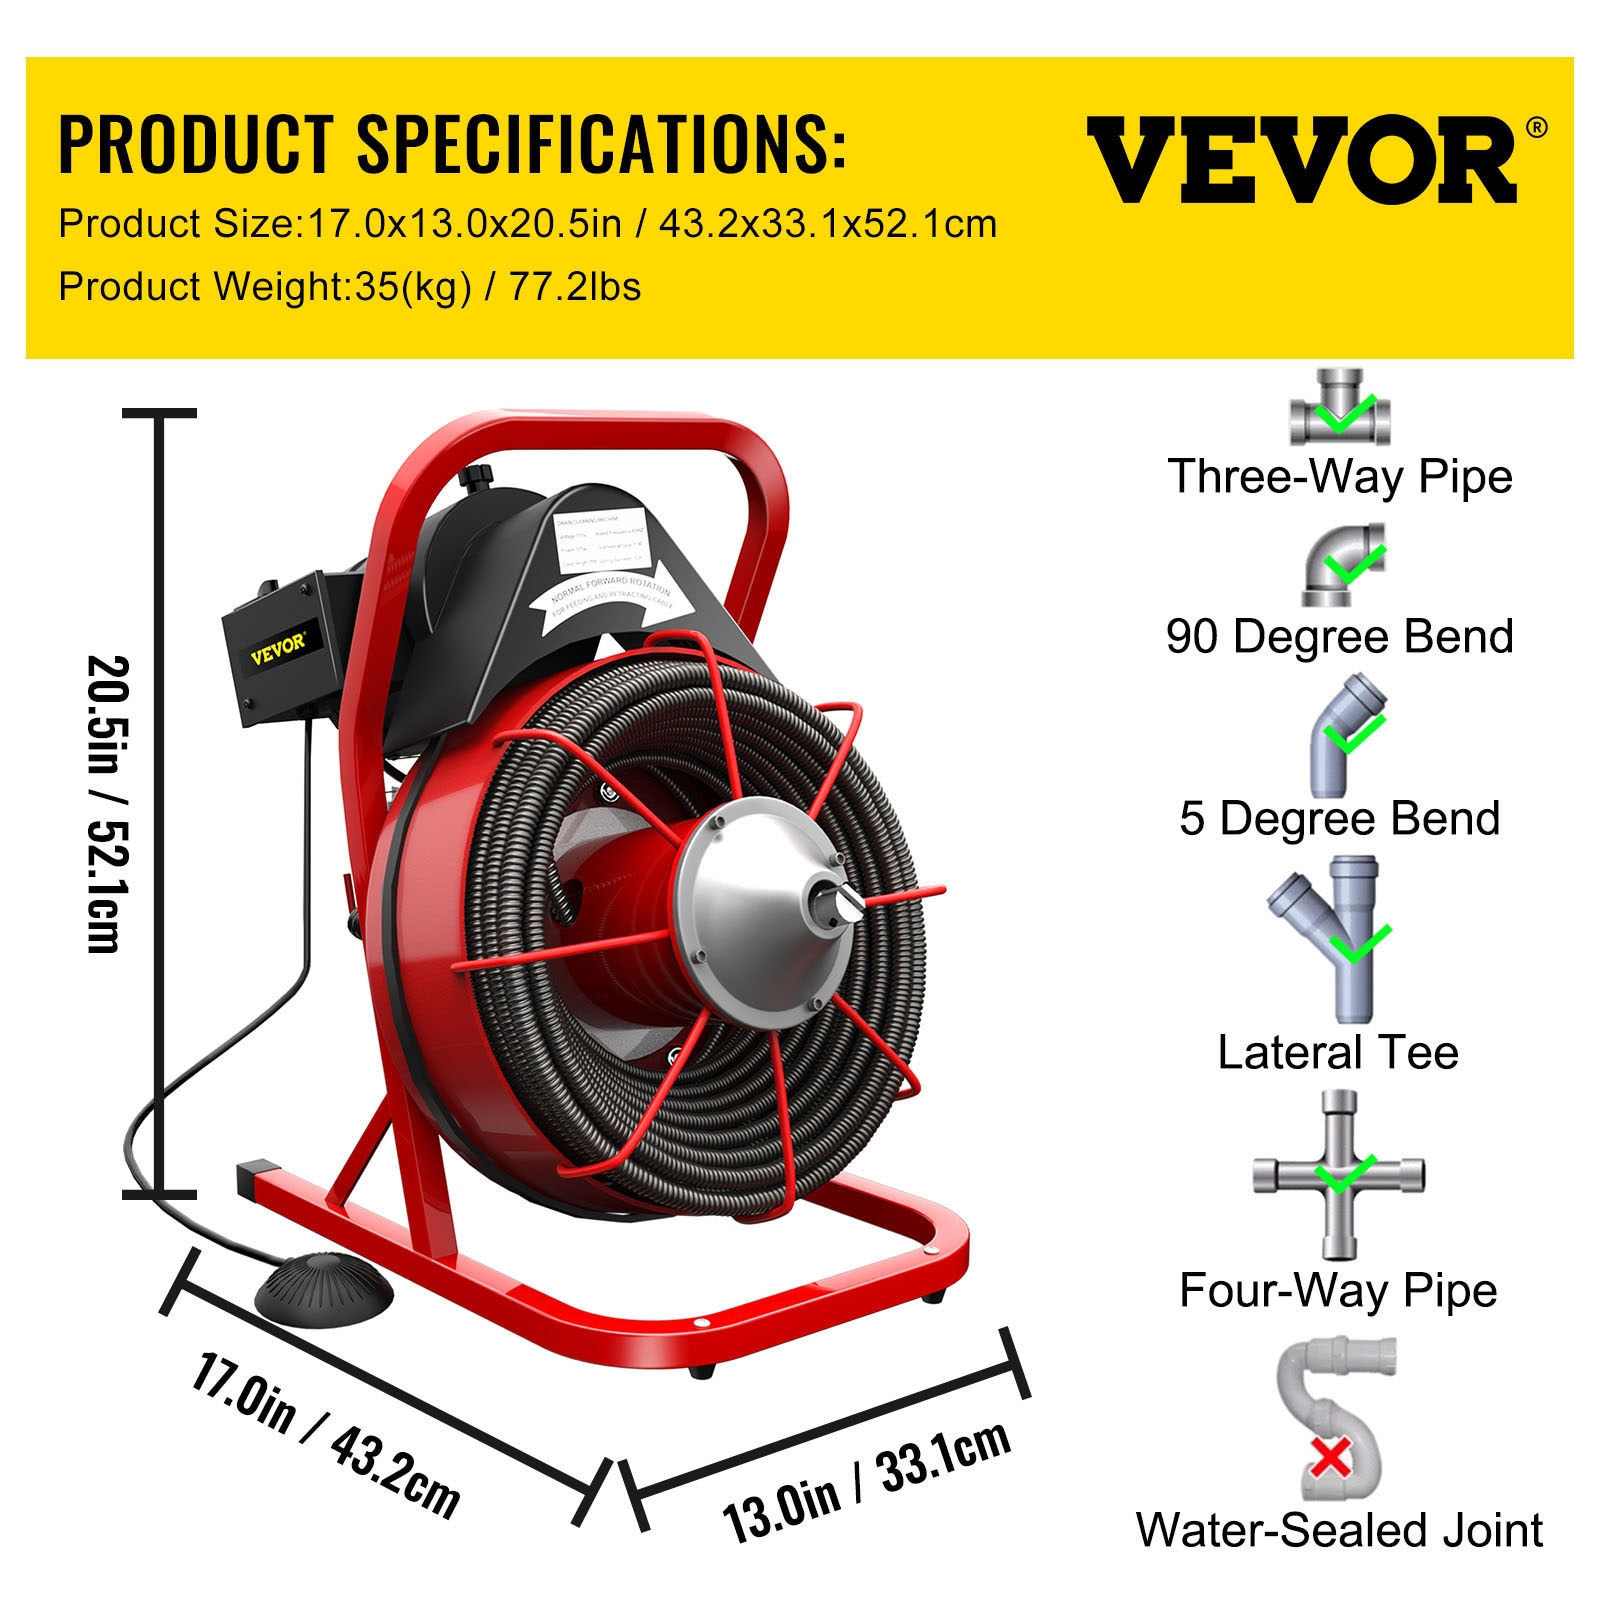 VEVOR Electric Drain Auger, 75' x 3/8, 250W Drain Cleaner Machine Fit 2''-  4'' Pipes, Hair Catcher for Kitchen Sink, Bathroom Tub, Toilet Clogged,  Drains Dredge, Foliose Sewers